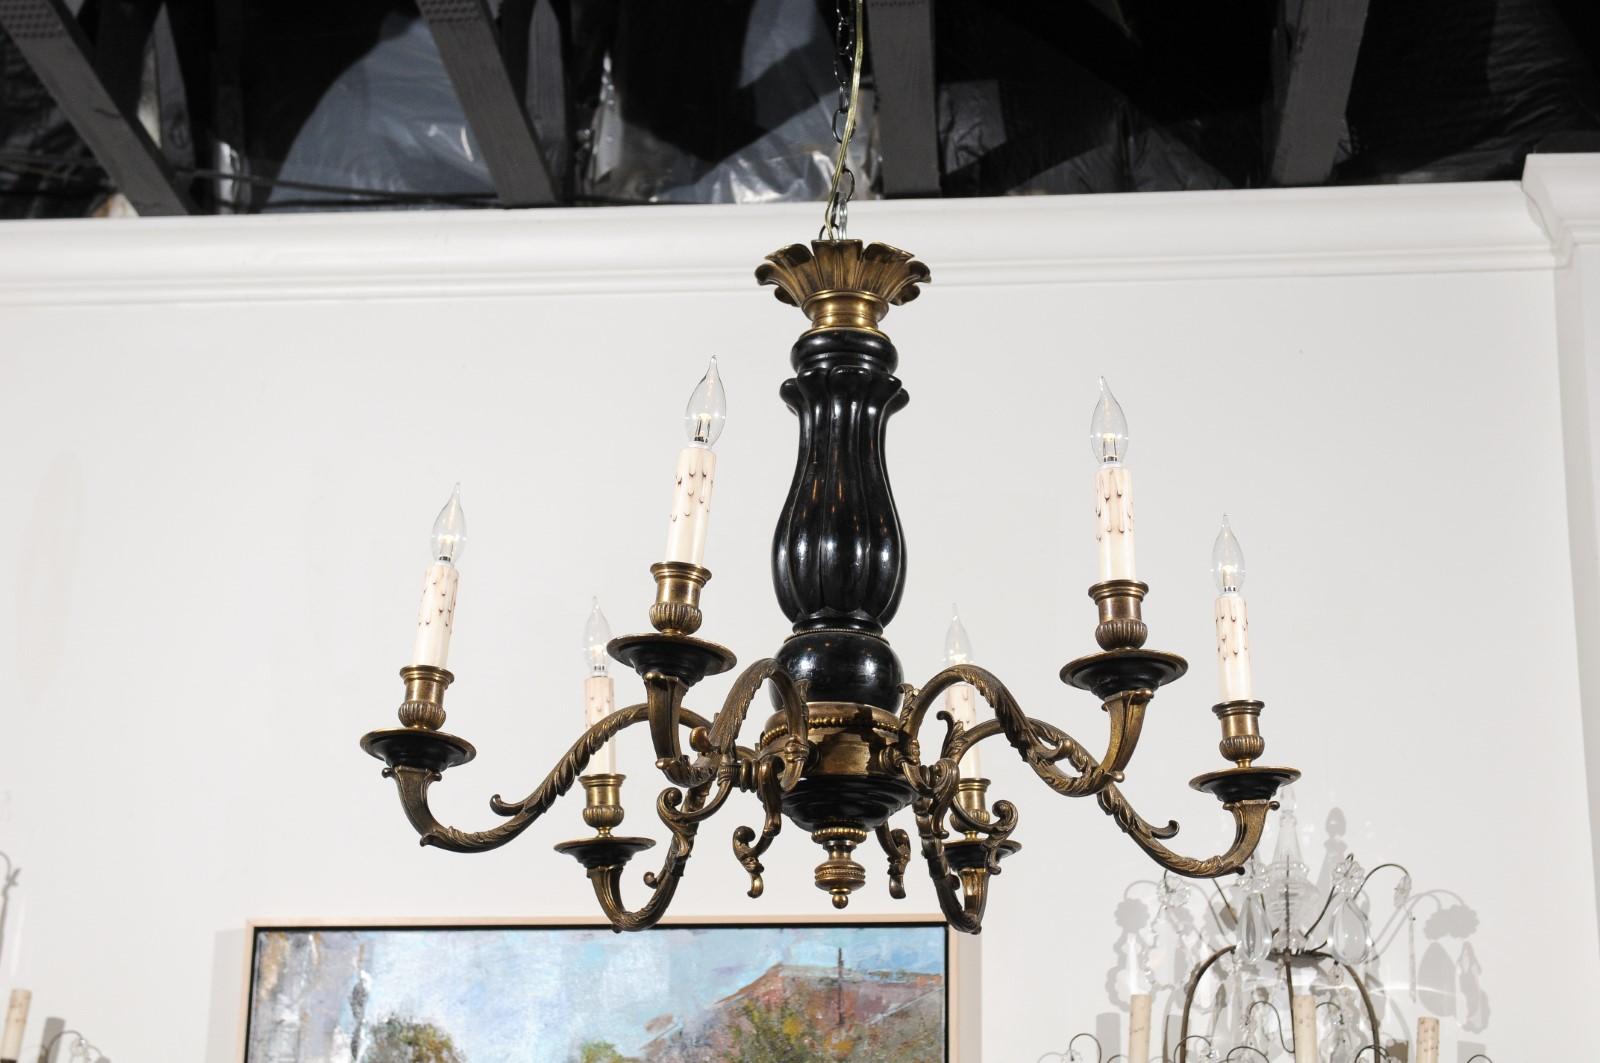 A French Napoleon III period carved ebonized wood and bronze six-light chandelier from the mid-19th century, with scrolling arms and acanthus leaf motifs. Born in France during the reign of France's last emperor Napoleon III, this exquisite